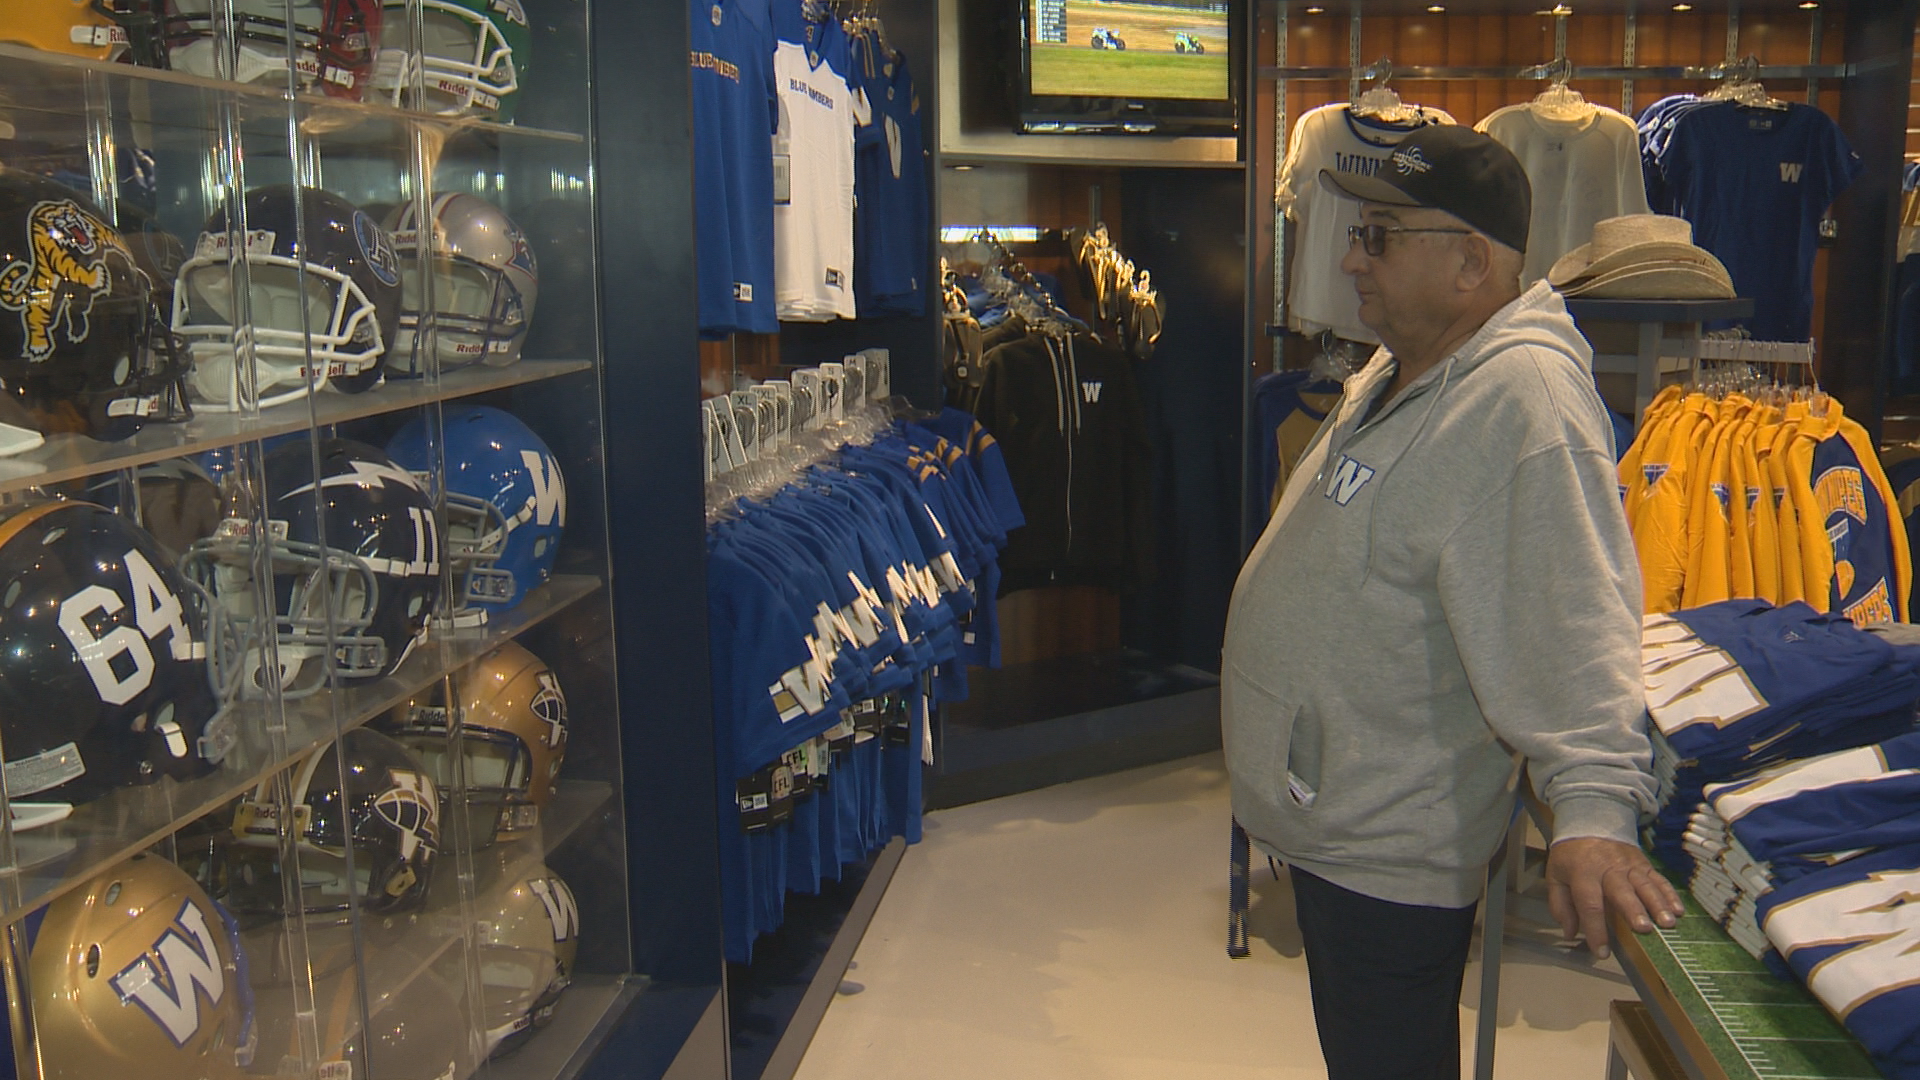 Grey Cup excitement hits Winnipeg fans, as the Blue Bombers gear up for showdown with Montreal